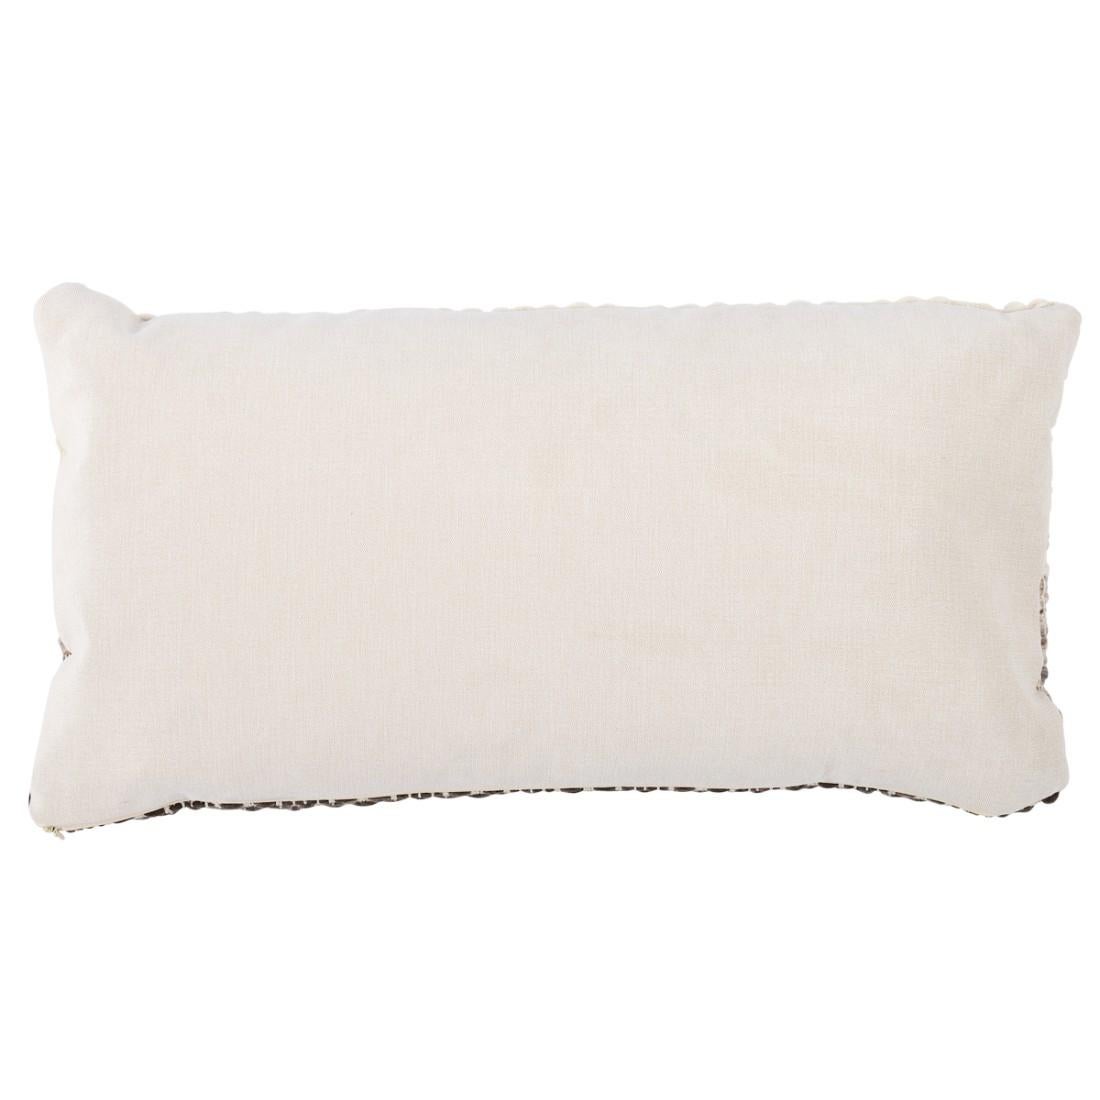 The Dam Pond pillow by Shed Textile Company is individually hand woven in opulent two-tone 100% American Merino wool with a mixed fiber backing. Pillow includes a feather/down fill insert and hidden zipper closure.

*If out of stock, lead-time is